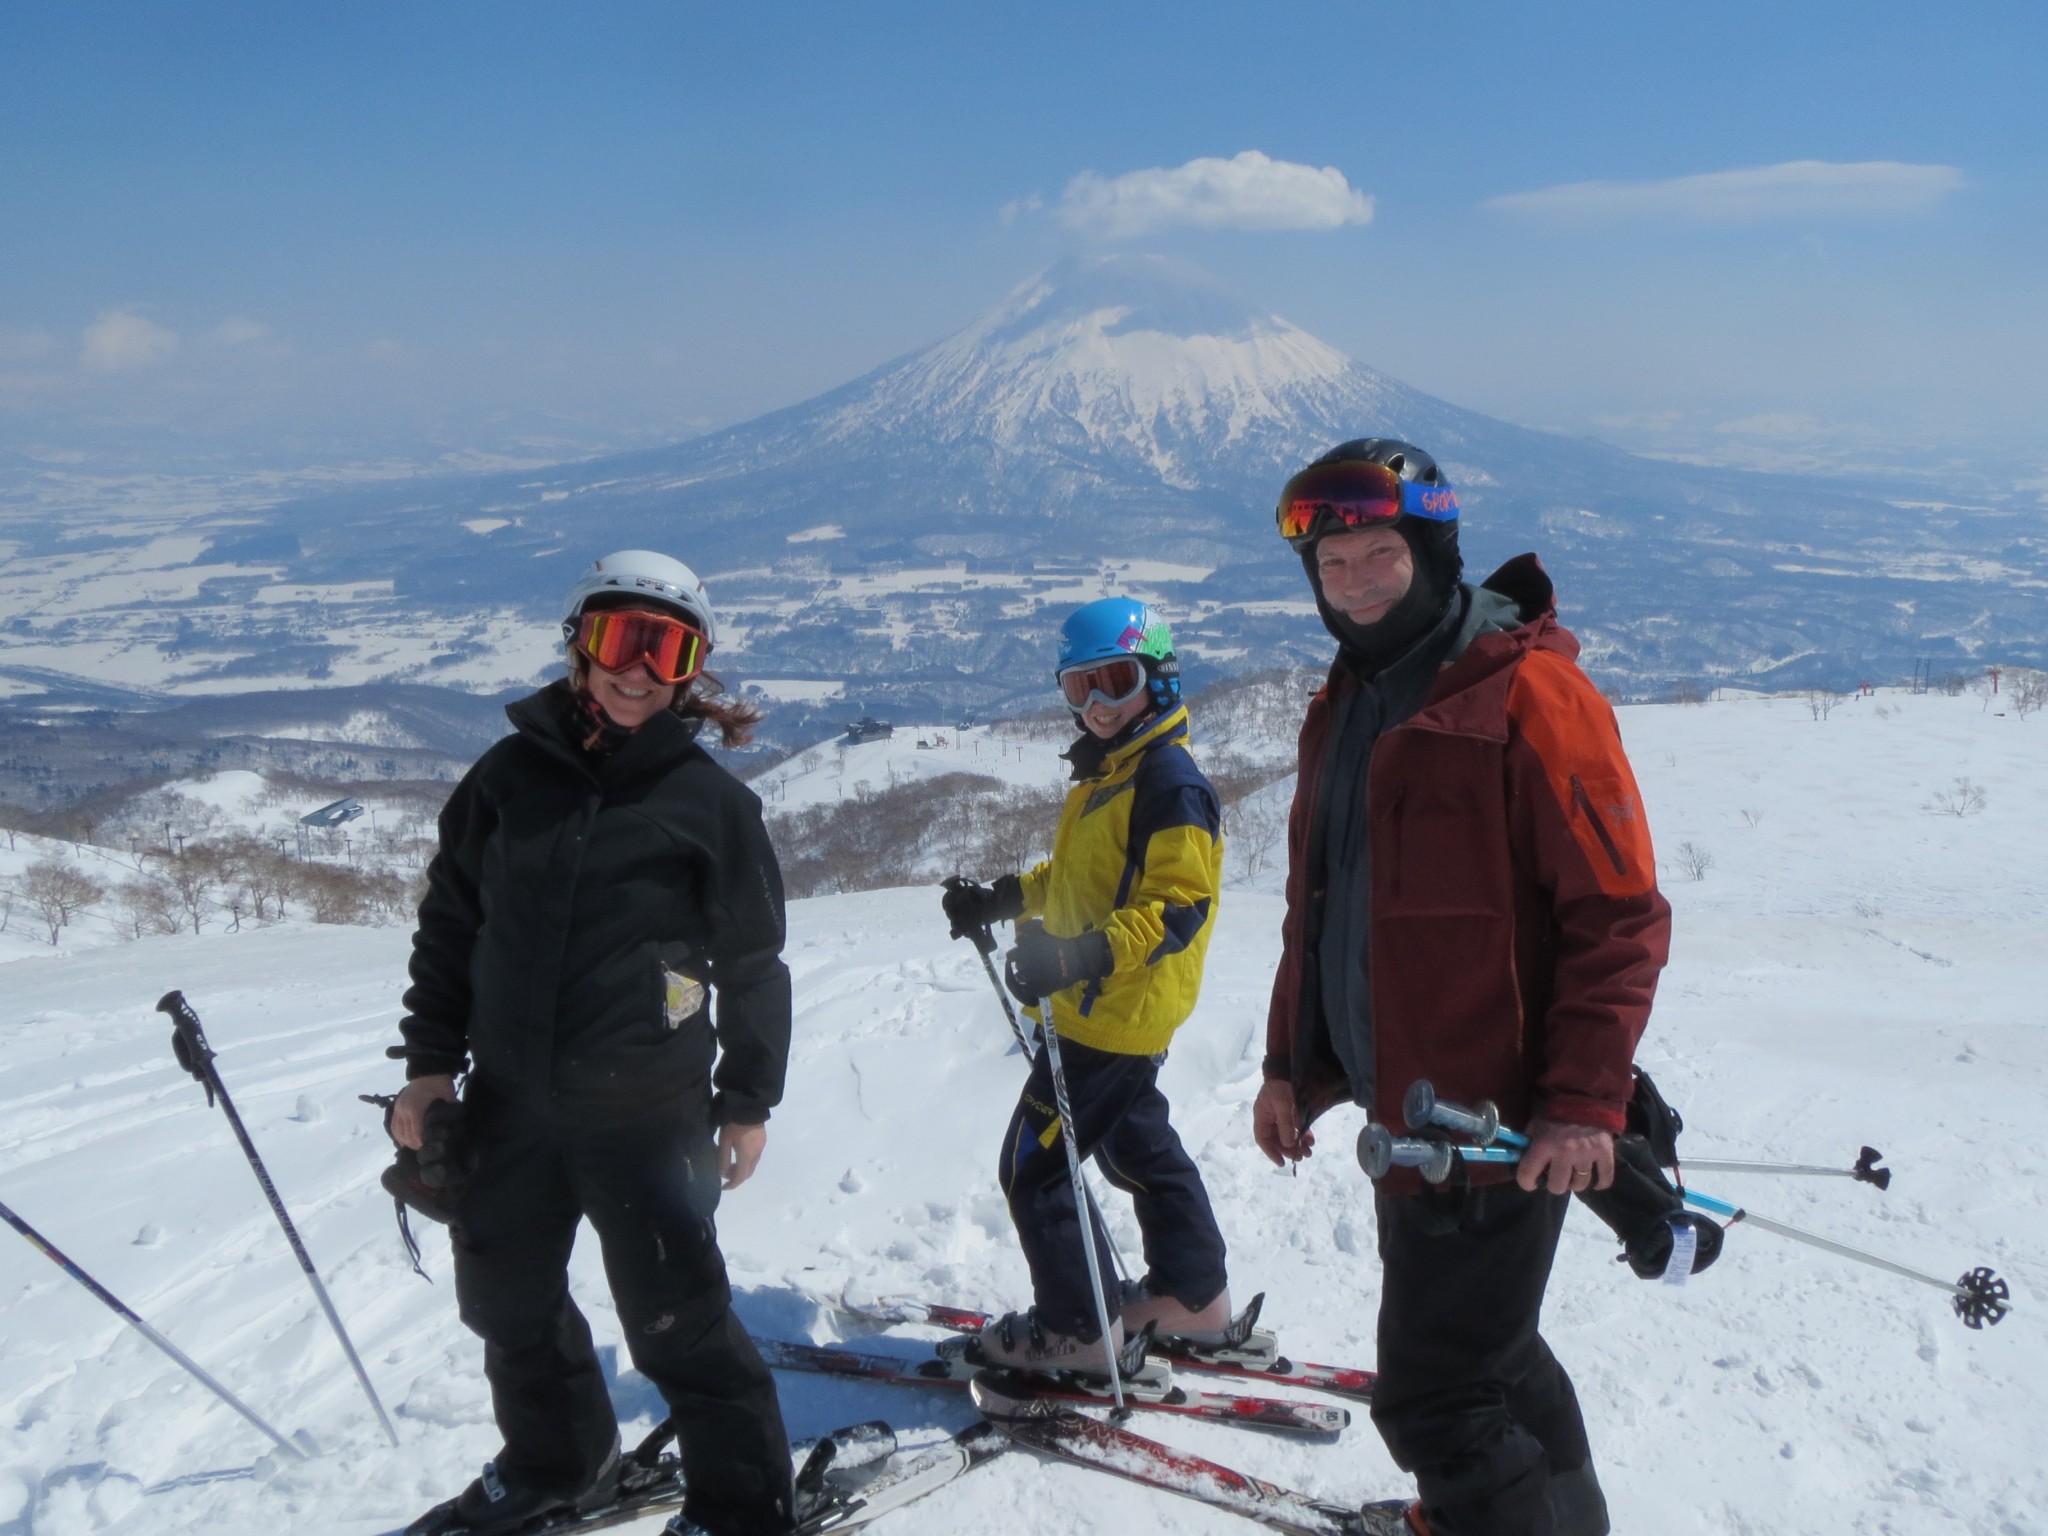 6 Reasons to Escape and Go Skiing at Easter